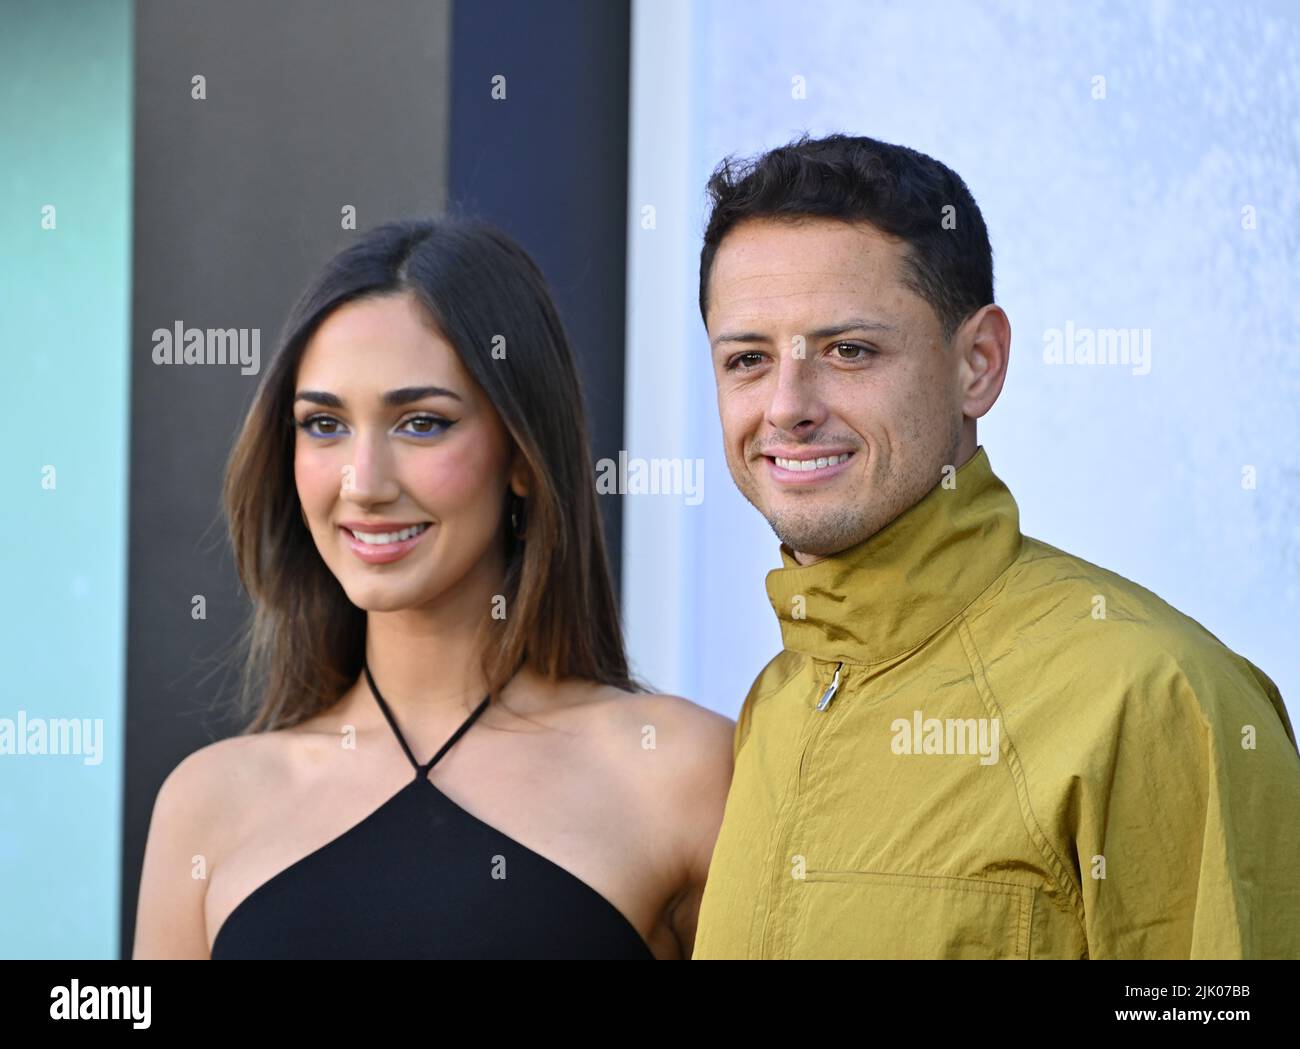 Los Angeles, USA. 28th July, 2022. LOS ANGELES, USA. July 28, 2022: Nicole McPherson & Javier Chicharito Hernandez at the premiere for 'Thirteen Lives' at the Regency Village Theatre, Westwood. Picture Credit: Paul Smith/Alamy Live News Stock Photo